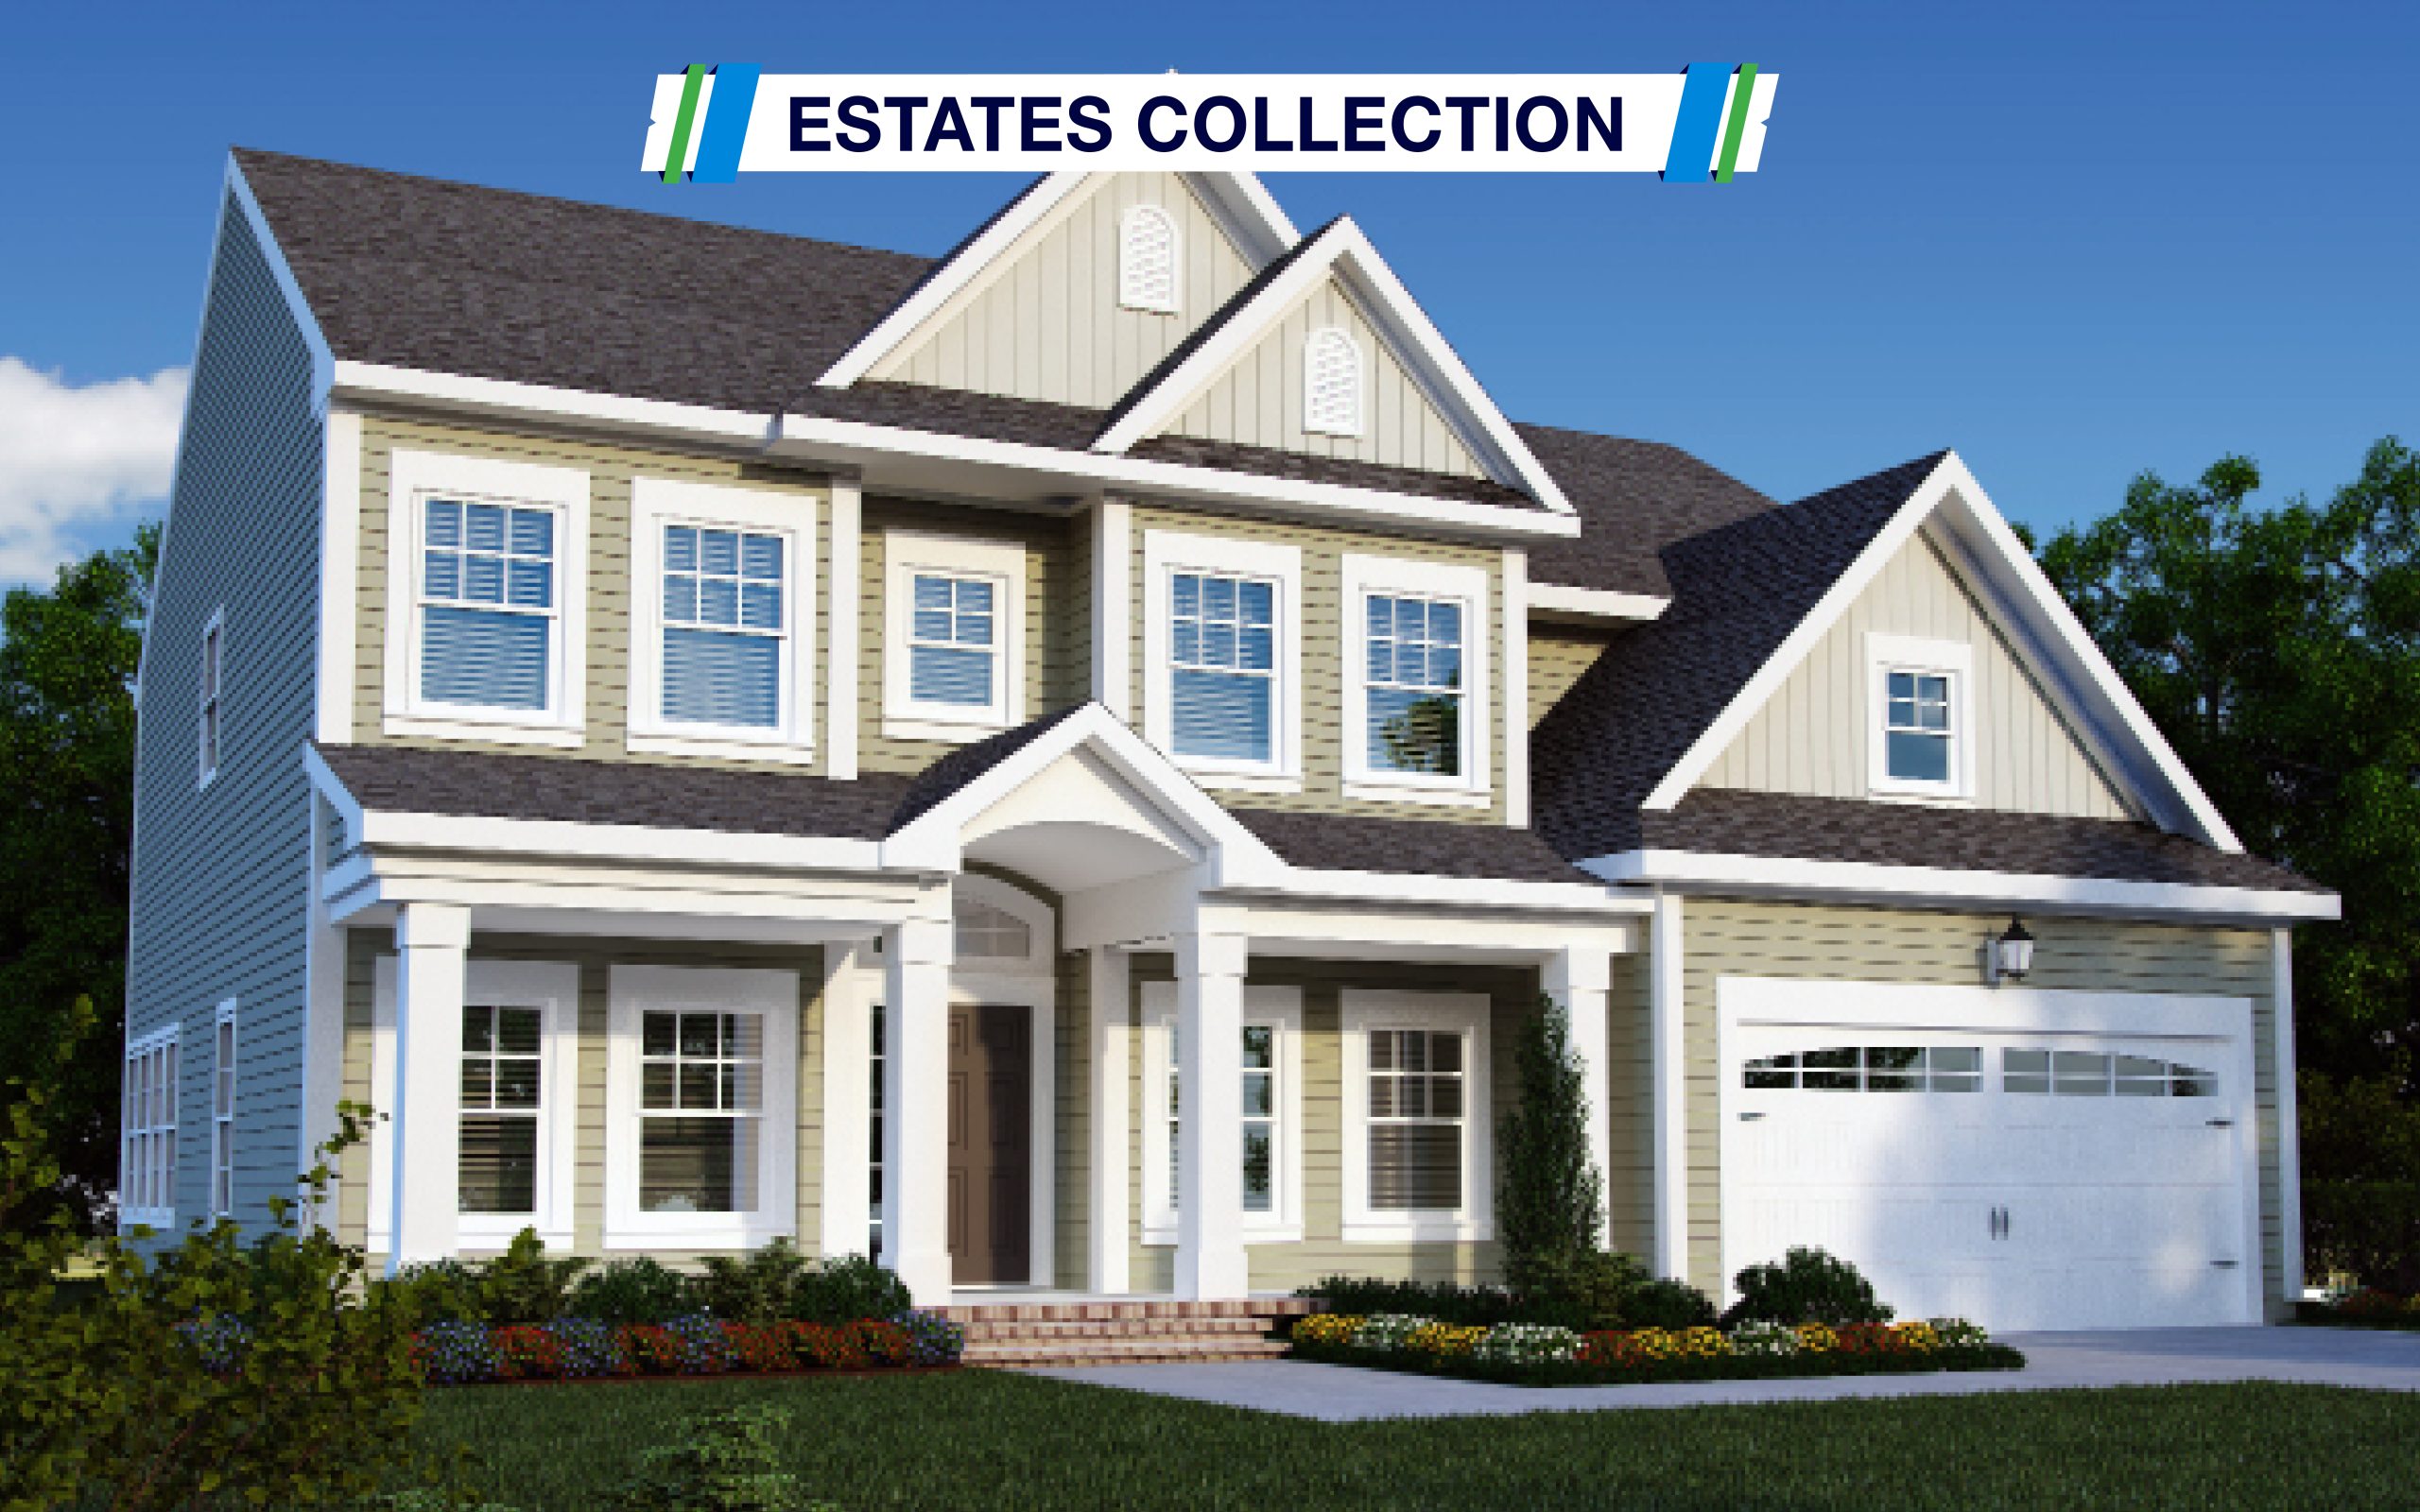 Front view image of the Capri Model - the Estates Collection. Two car garage, front porch and 10 windows are visible. Home is light green and tan.